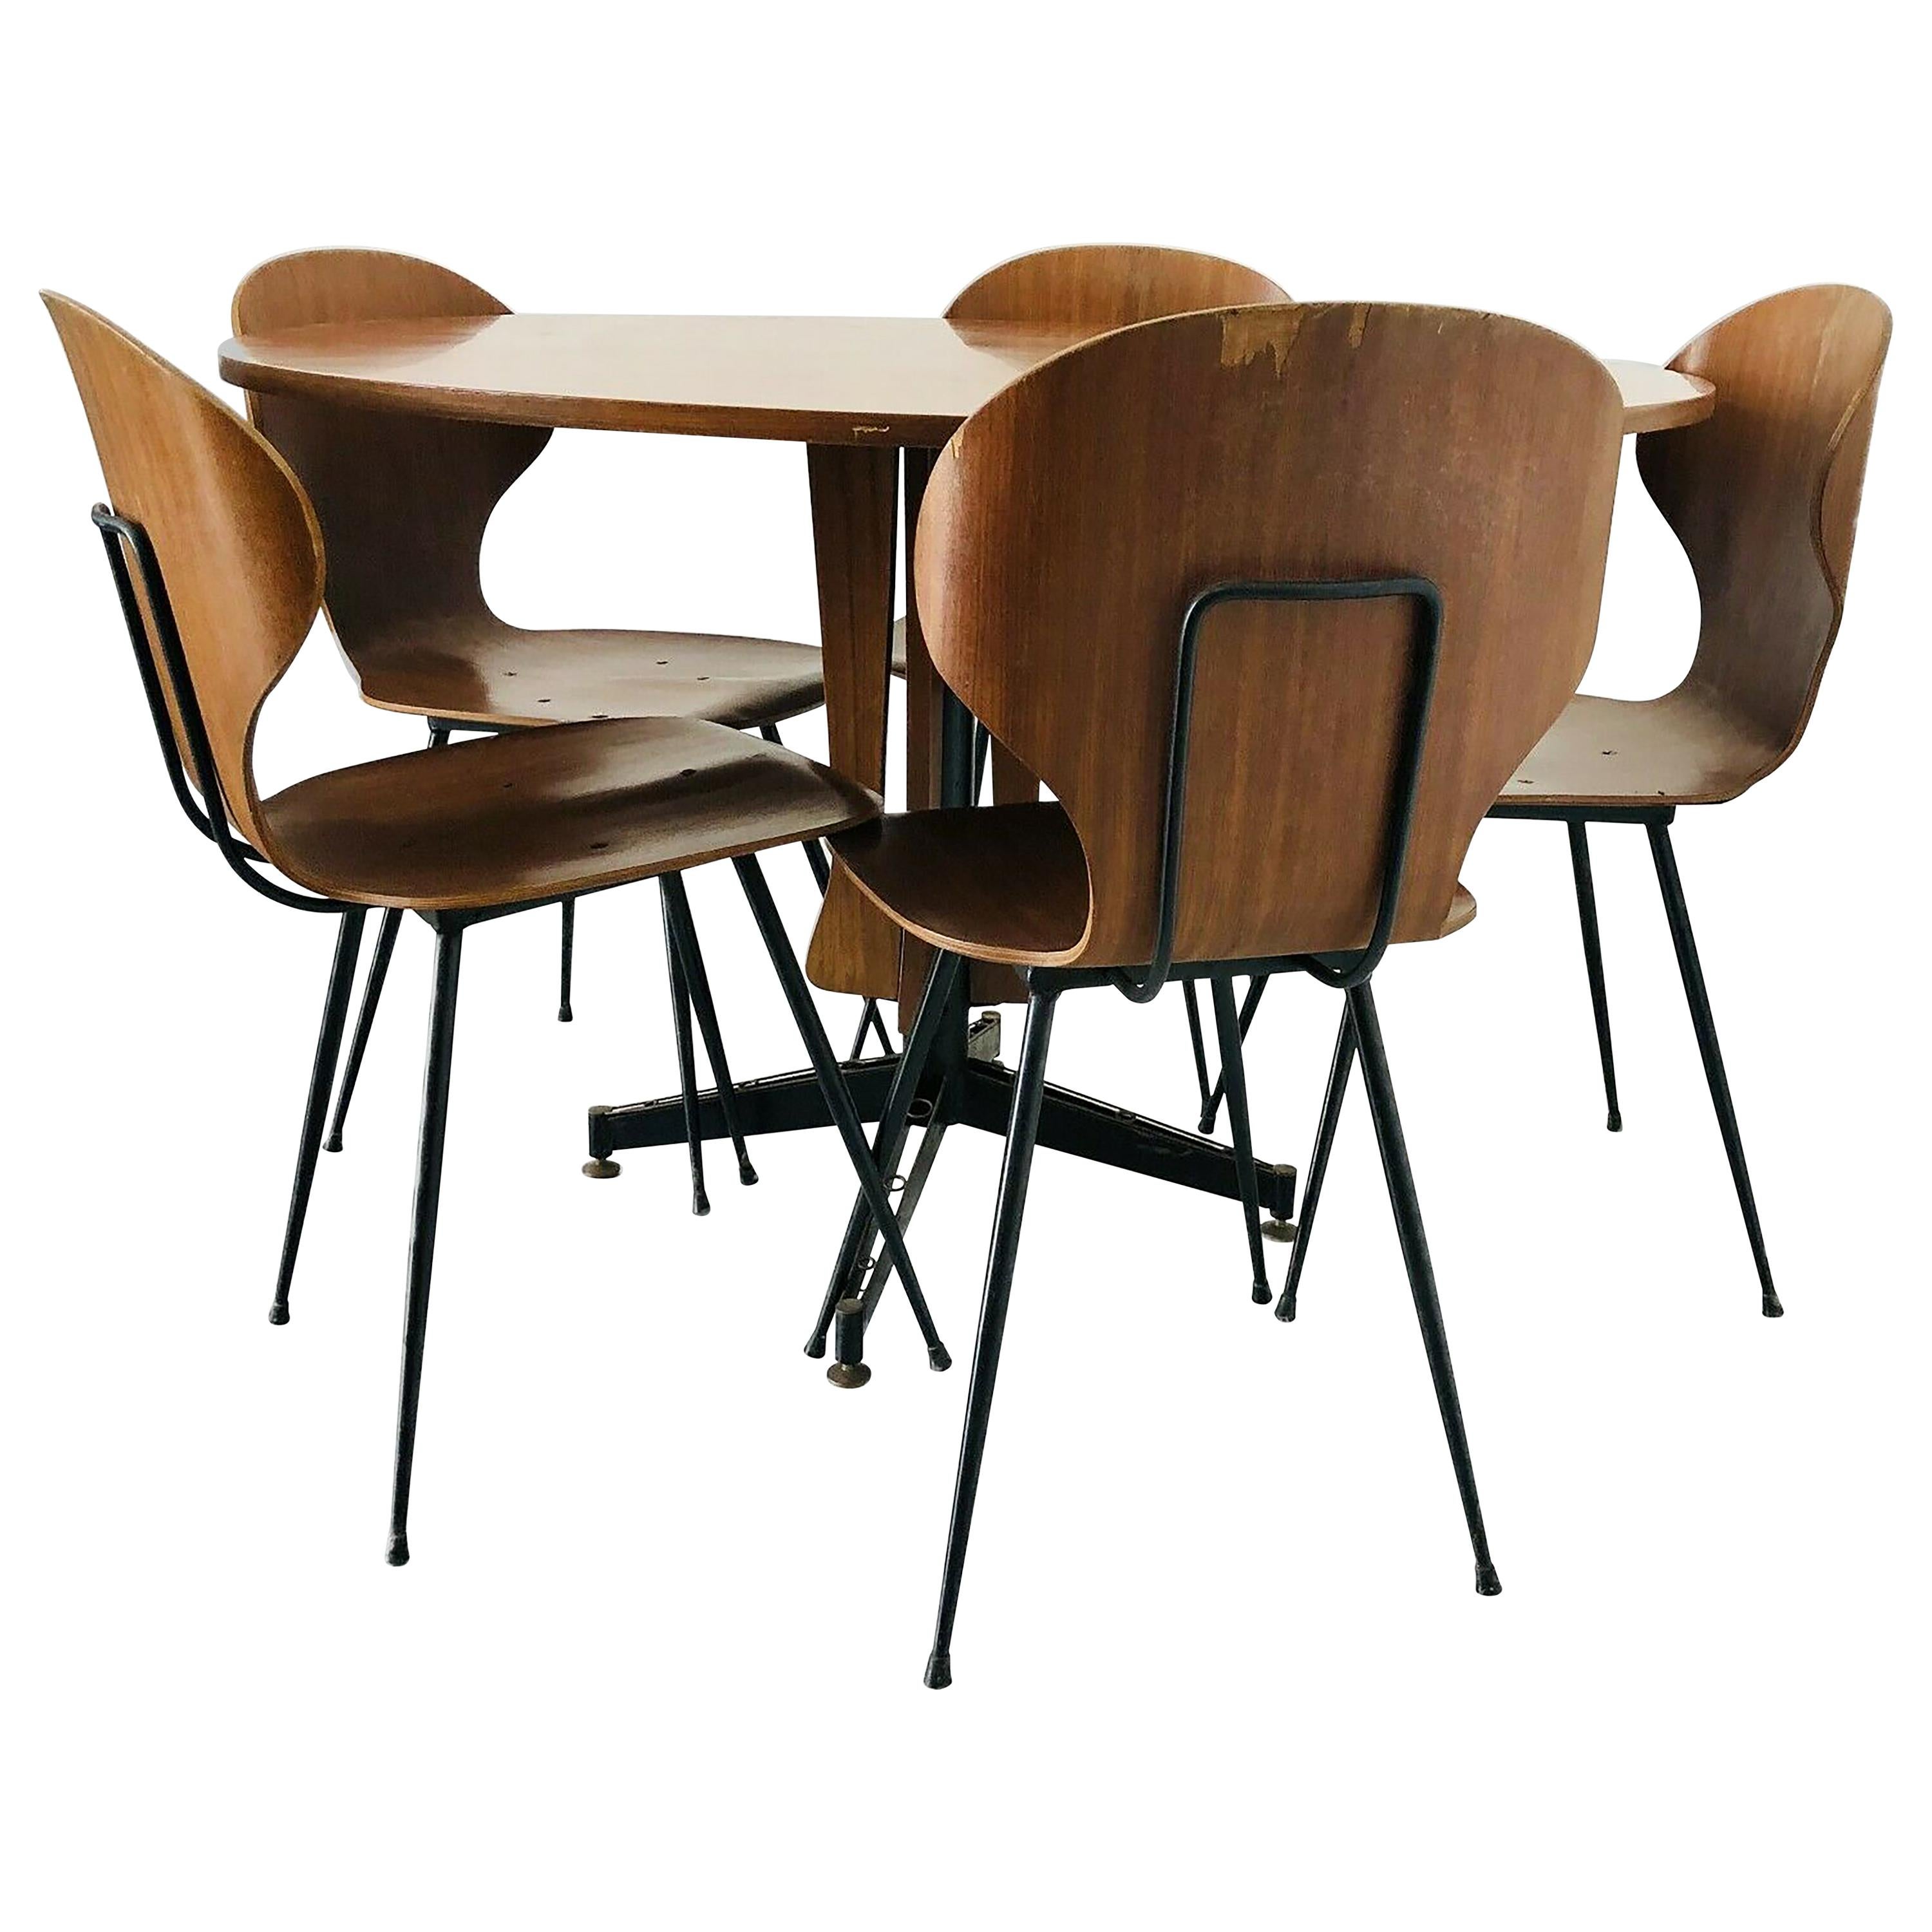 Dining Set of Table and Five Chairs, by Carlo Ratti, Italy, 1950s